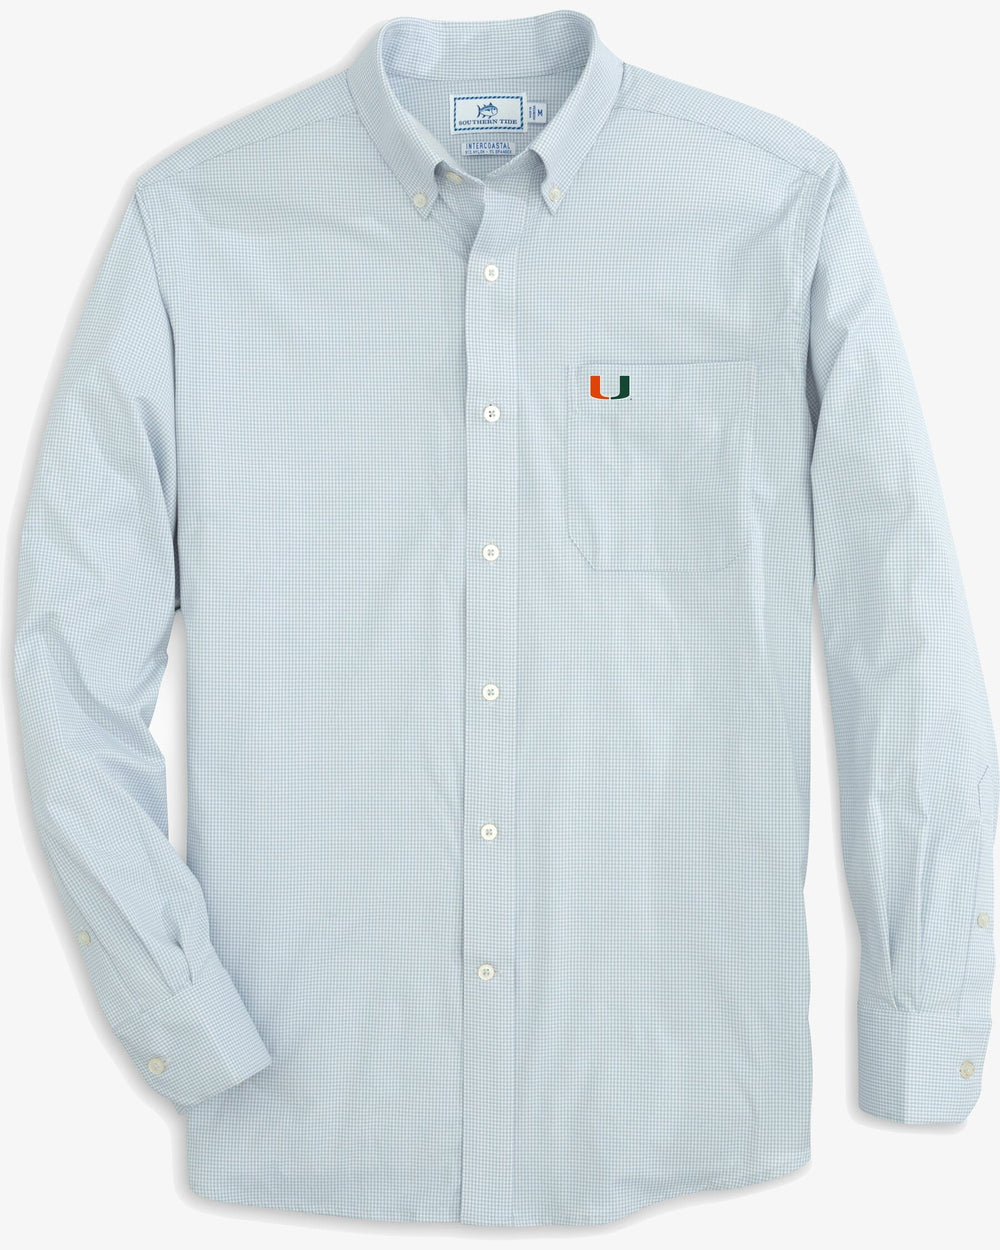 The front view of the Men's Orange Miami Hurricanes Gingham Button Down Shirt by Southern Tide - Slate Grey